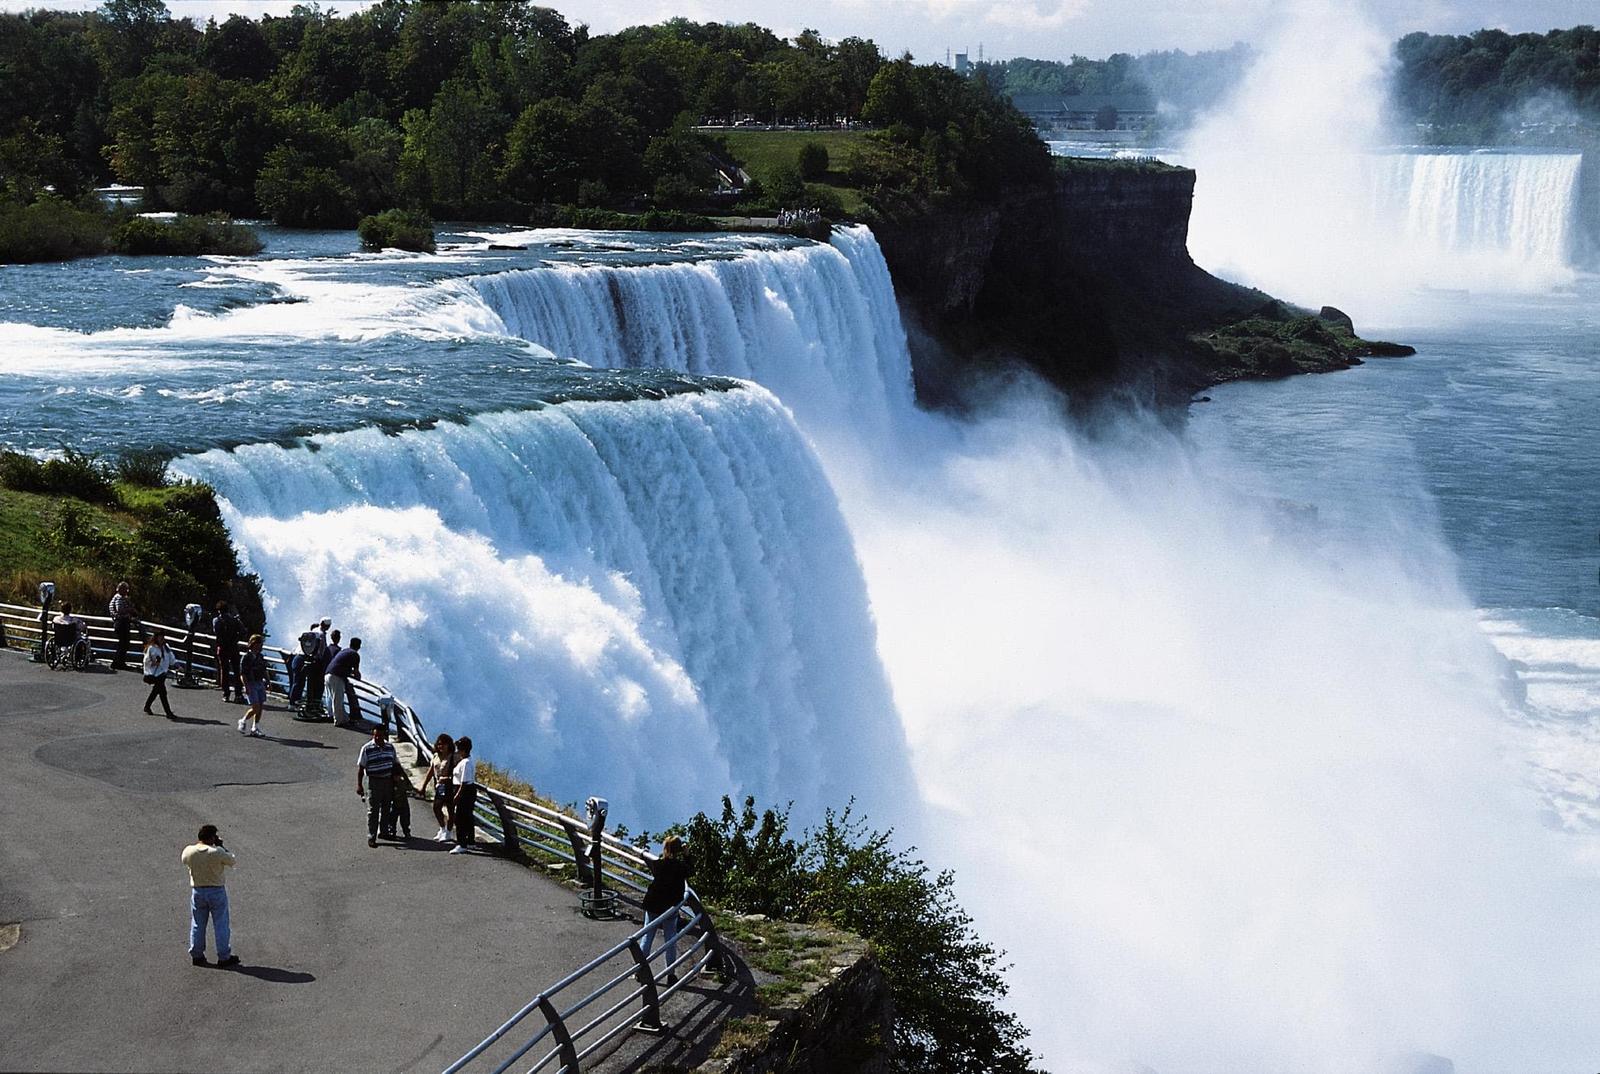 I’ll Be Gobsmacked If You Can Score at Least 15/20 on This Tricky Synonyms and Antonyms Quiz Niagara Falls